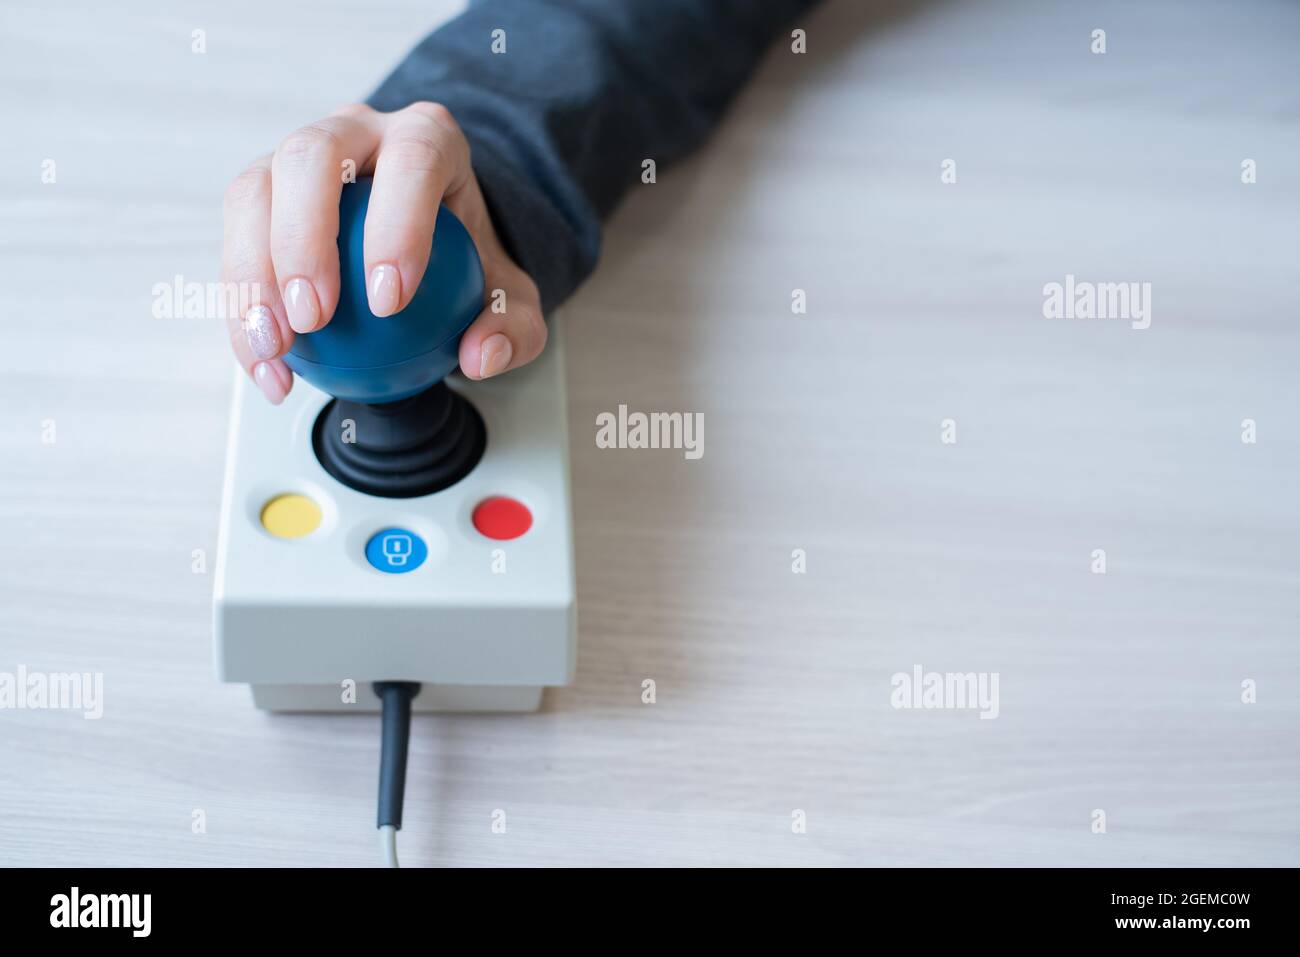 Woman with cerebral palsy works on a specialized computer mouse Stock Photo  - Alamy